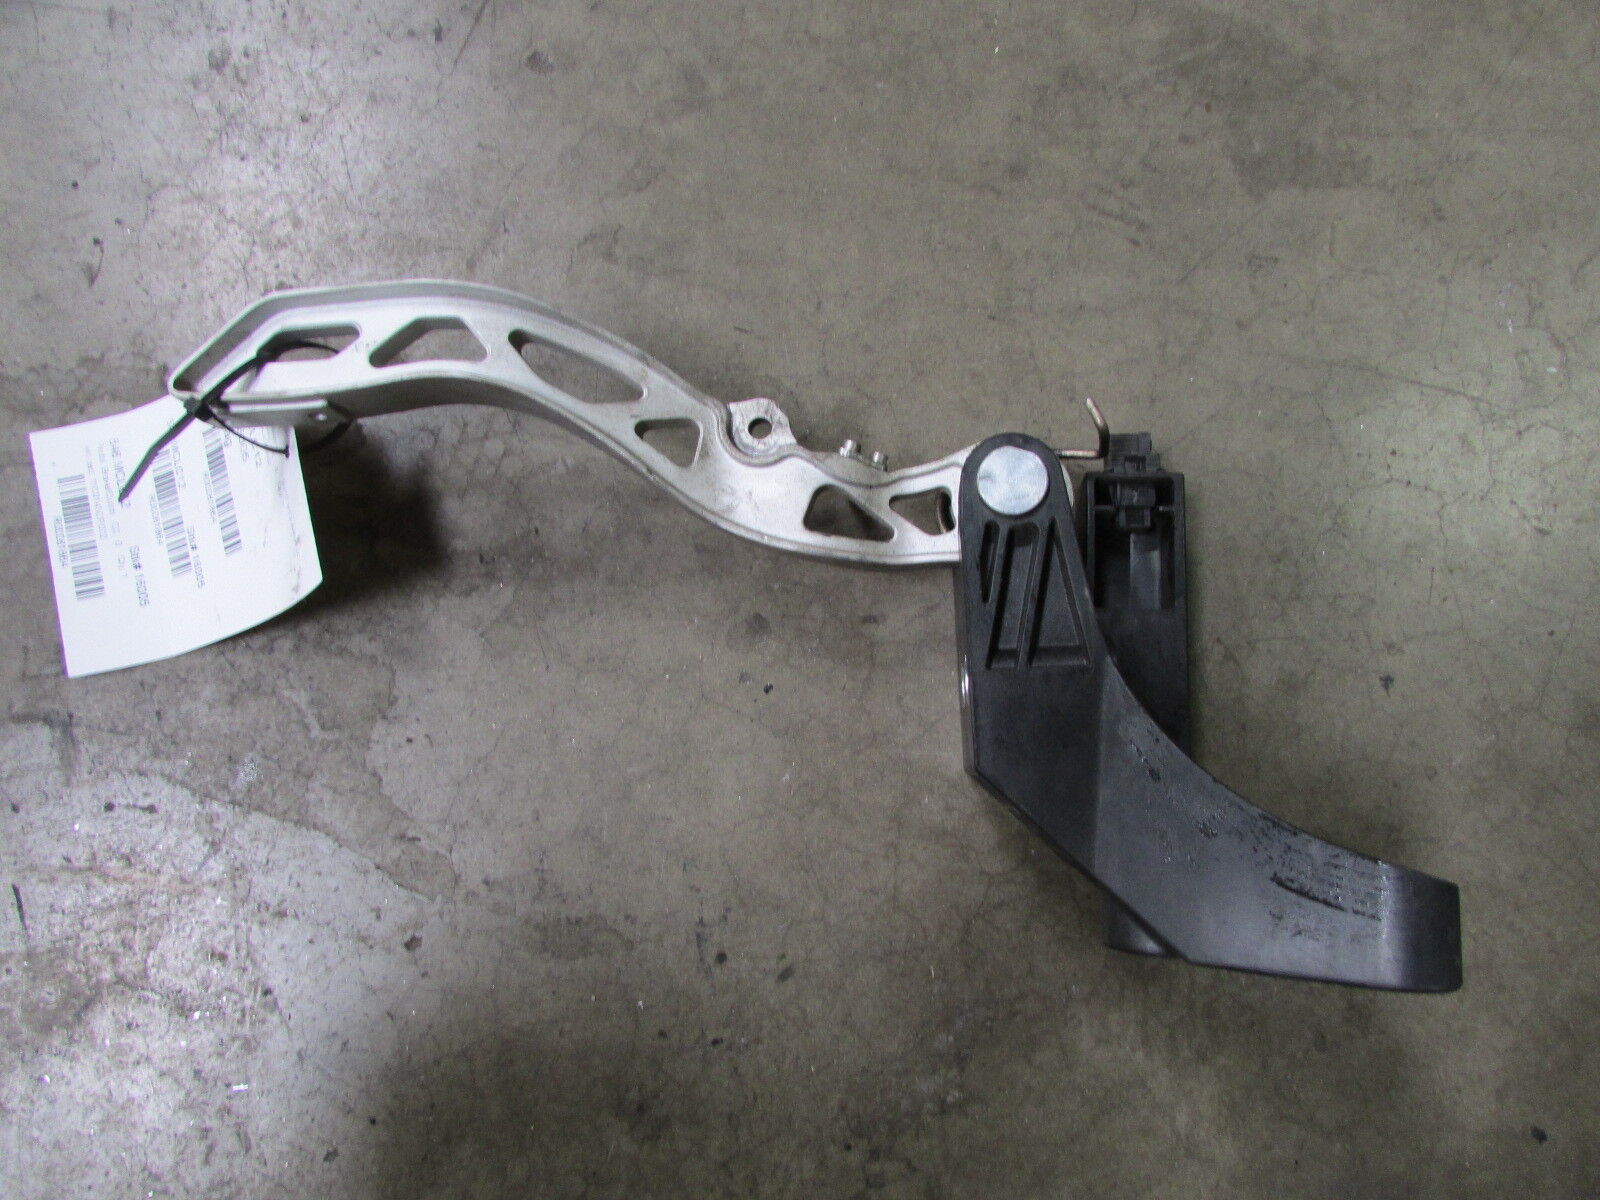 Mclaren MP4-12C, Brake Pedal, Used, Without Foot Pad P/N 11C0143CP.002